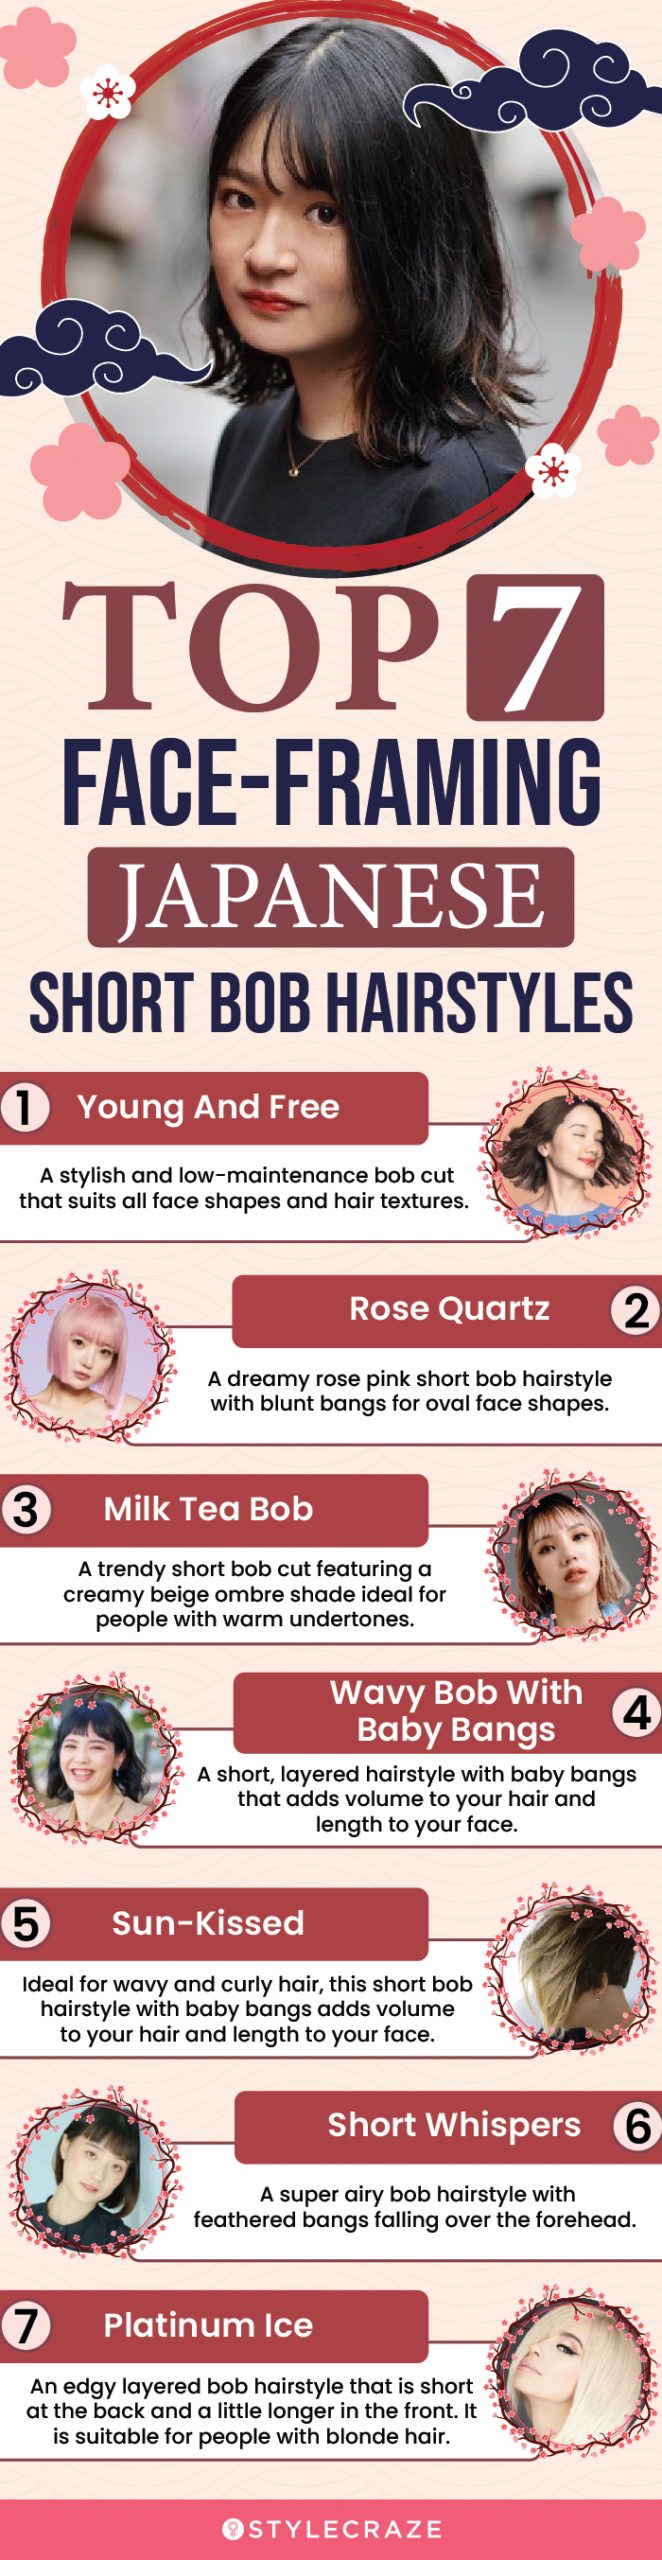 top 7 face framing japanese short bob hairstyles(infographic)